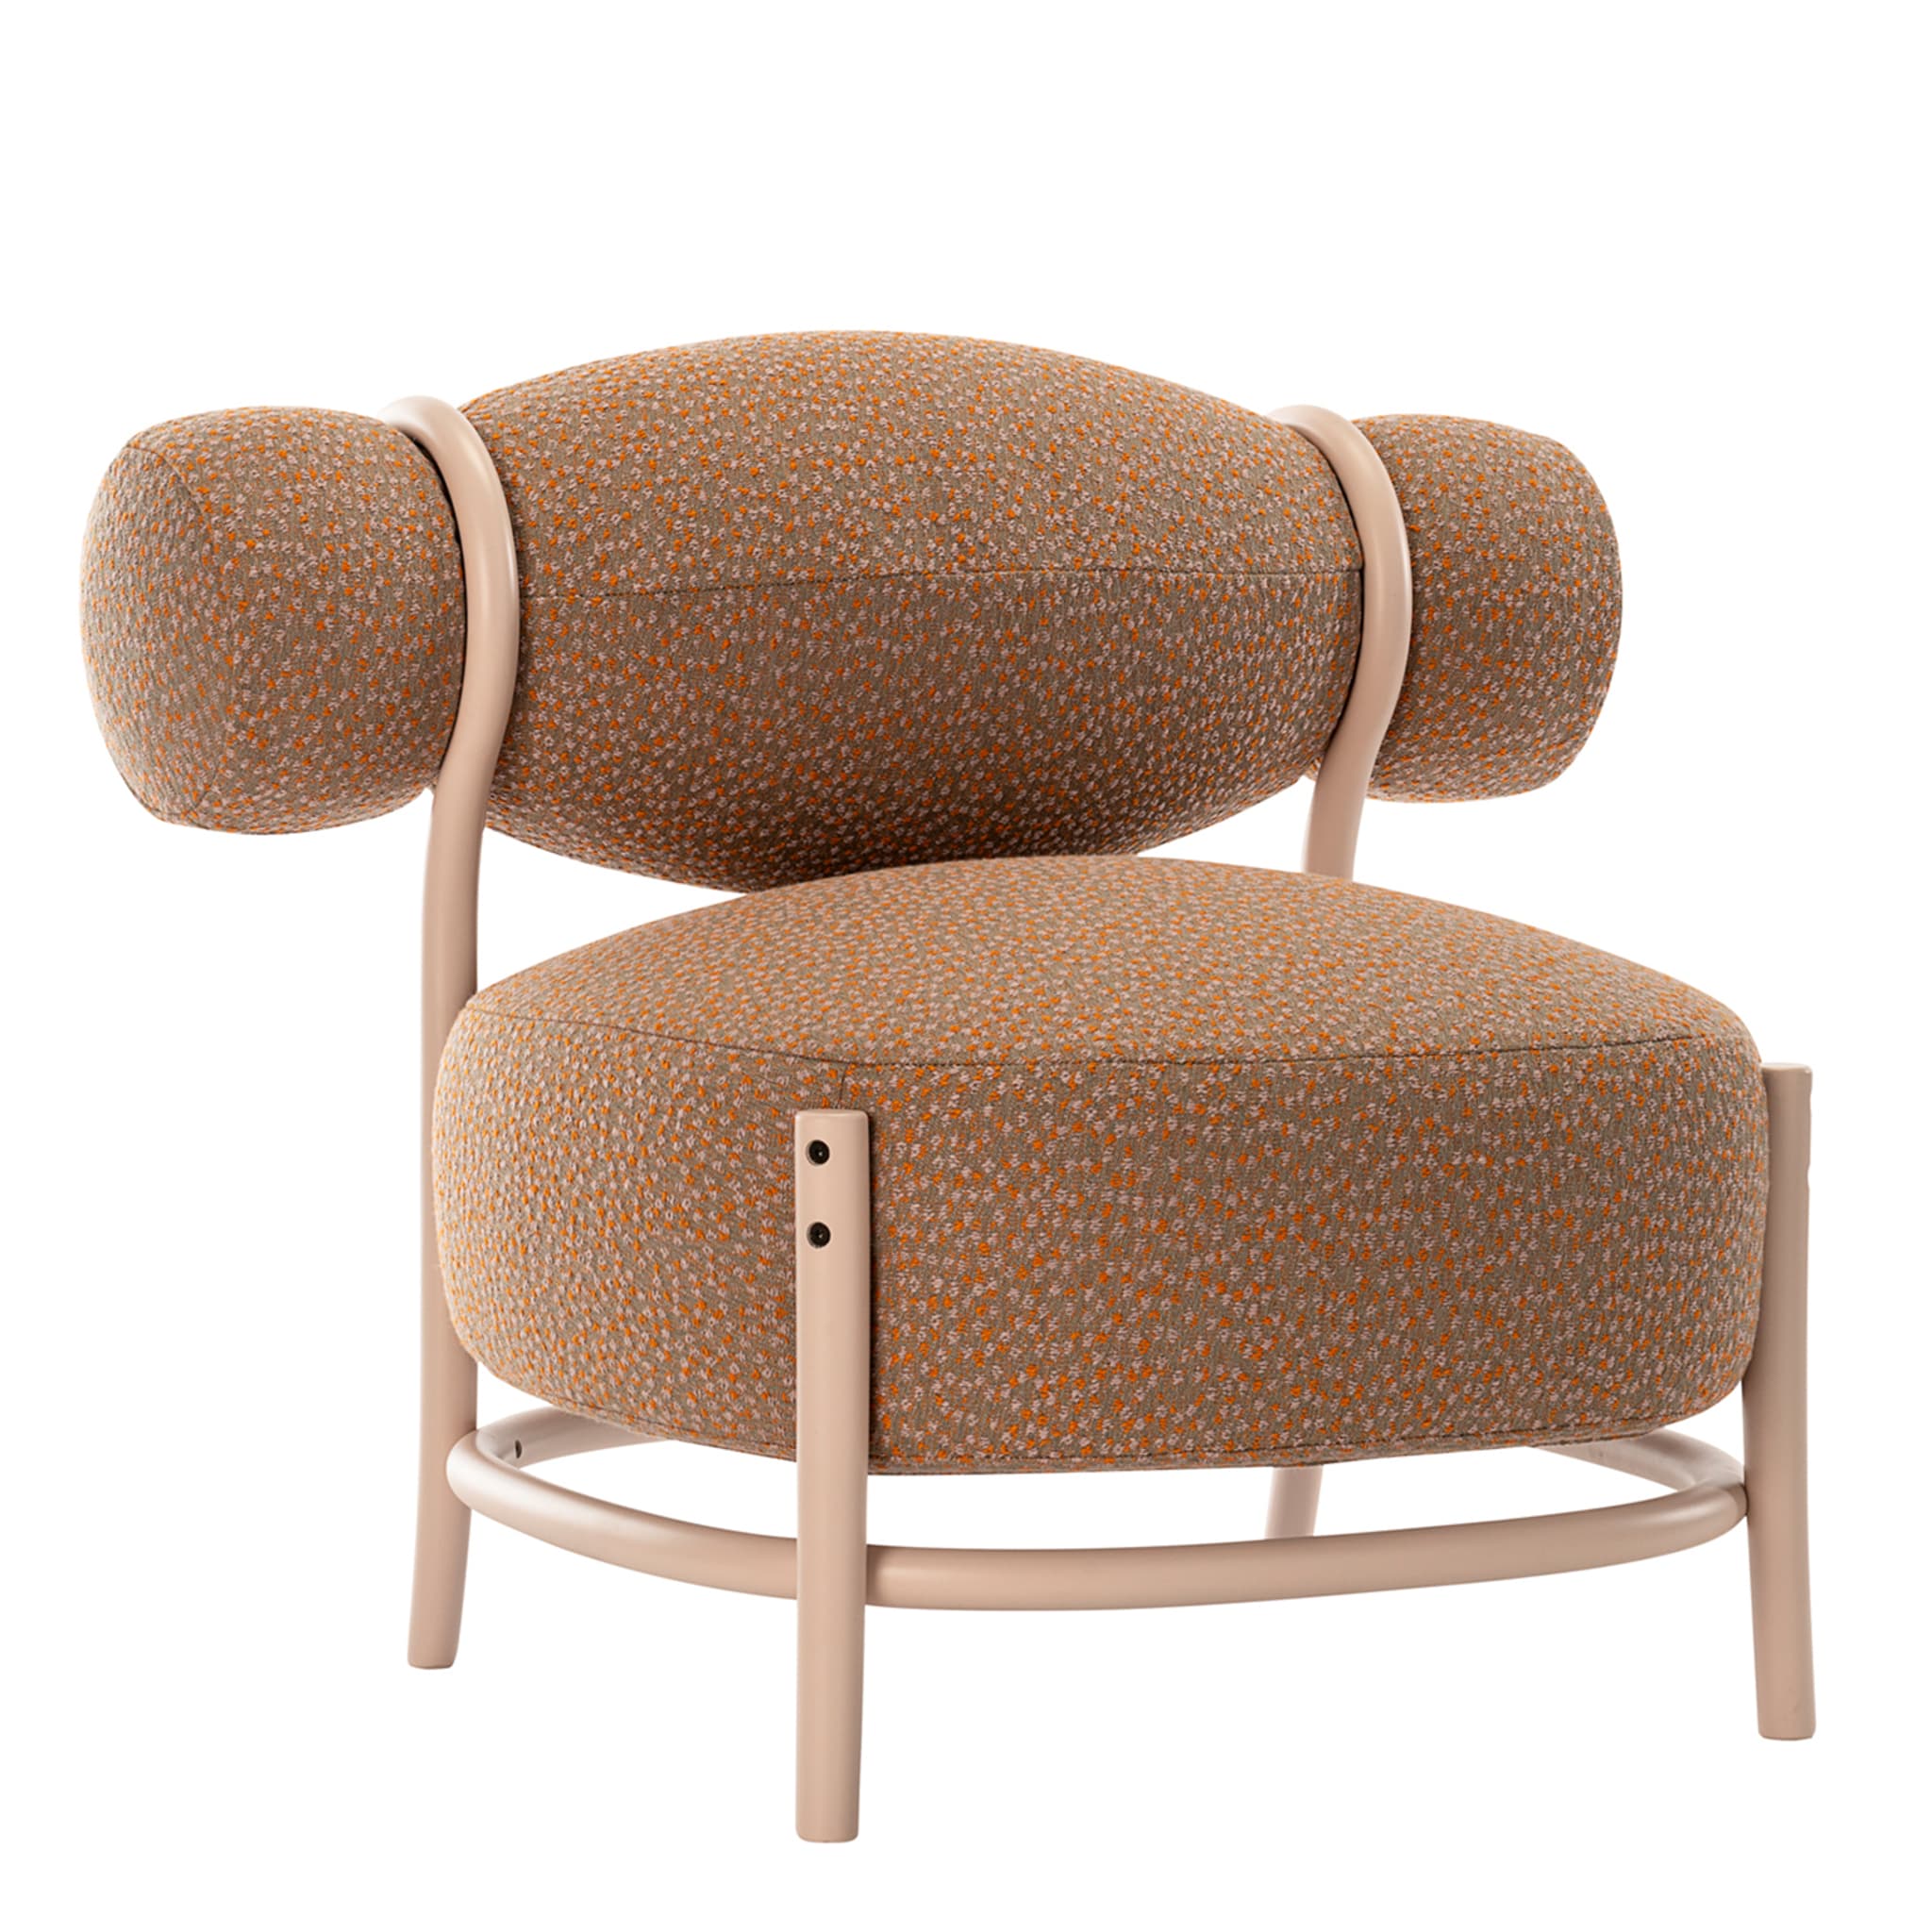 Chignon Accent Chair by LucidiPevere - Alternative view 1